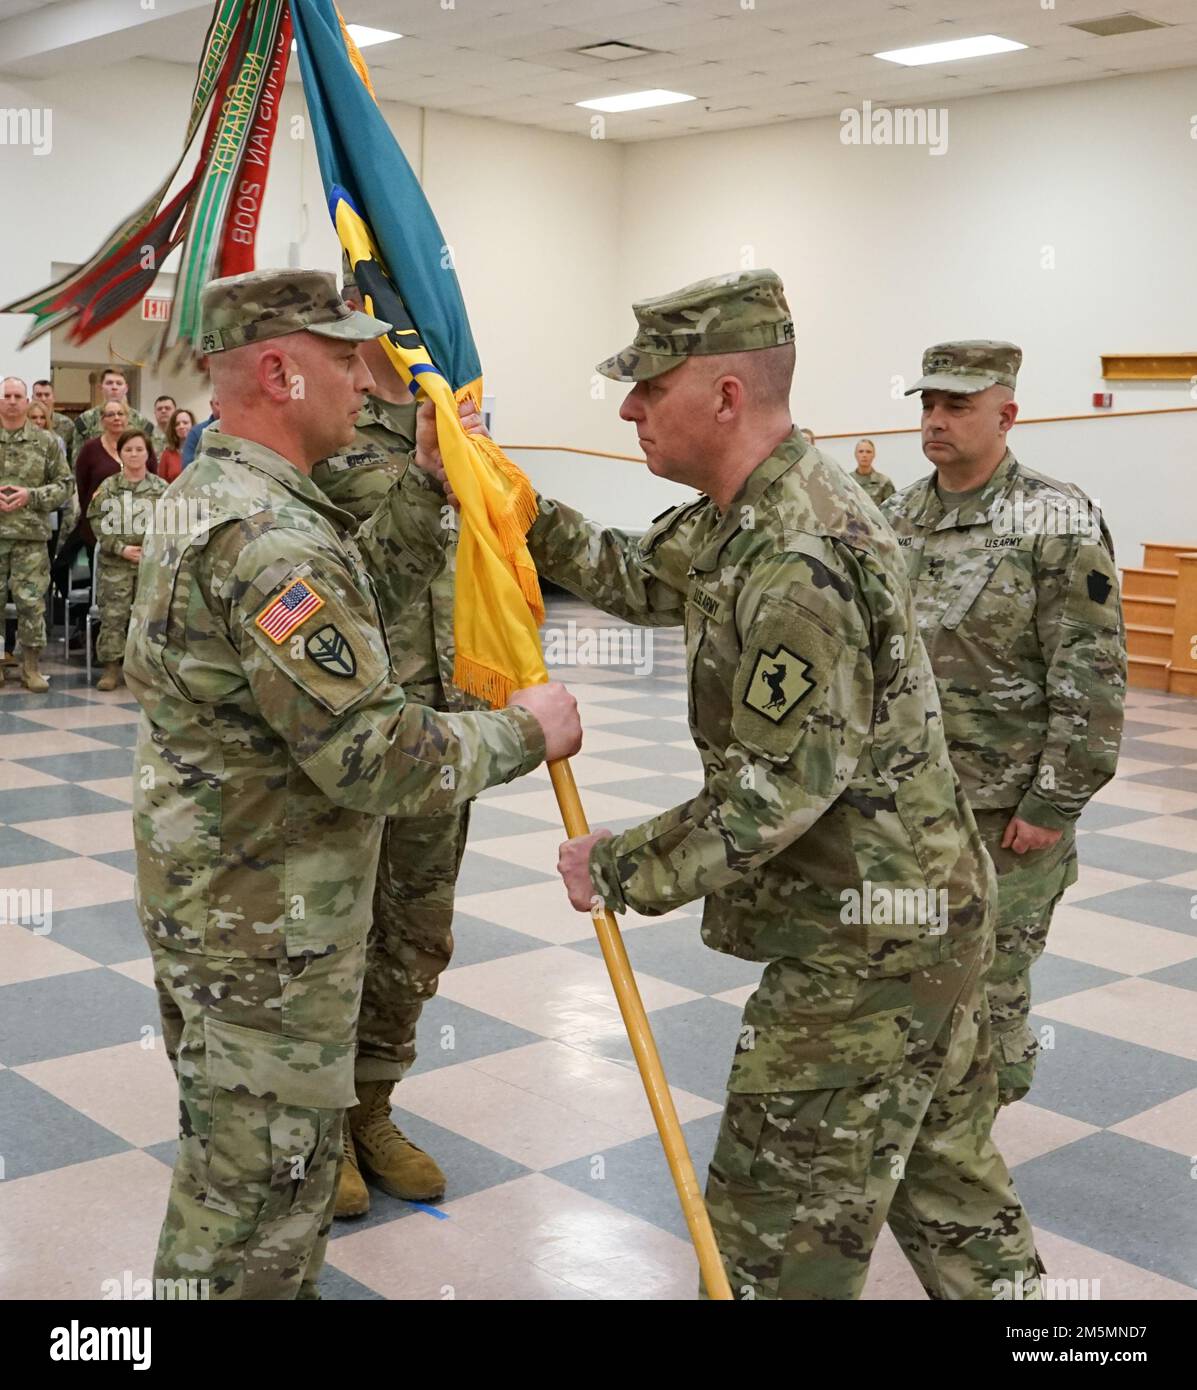 (Left to Right) Command Sgt. Maj. Shawn Phillips, command sergeant major of the 55th Maneuver Enhancement Brigade, is passed the brigade colors from Lt. Col. Brad Pierson, incoming commander of the 55th MEB, during the 55th MEB change-of-command ceremony at Fort Indiantown Gap, Pa., on March 26, 2022. Pierson was passed the brigade colors from Maj. Gen. Mark McCormack, commander of the 28th Infantry Division, and charged with commanding the Soldiers of the 55th MEB Stock Photo